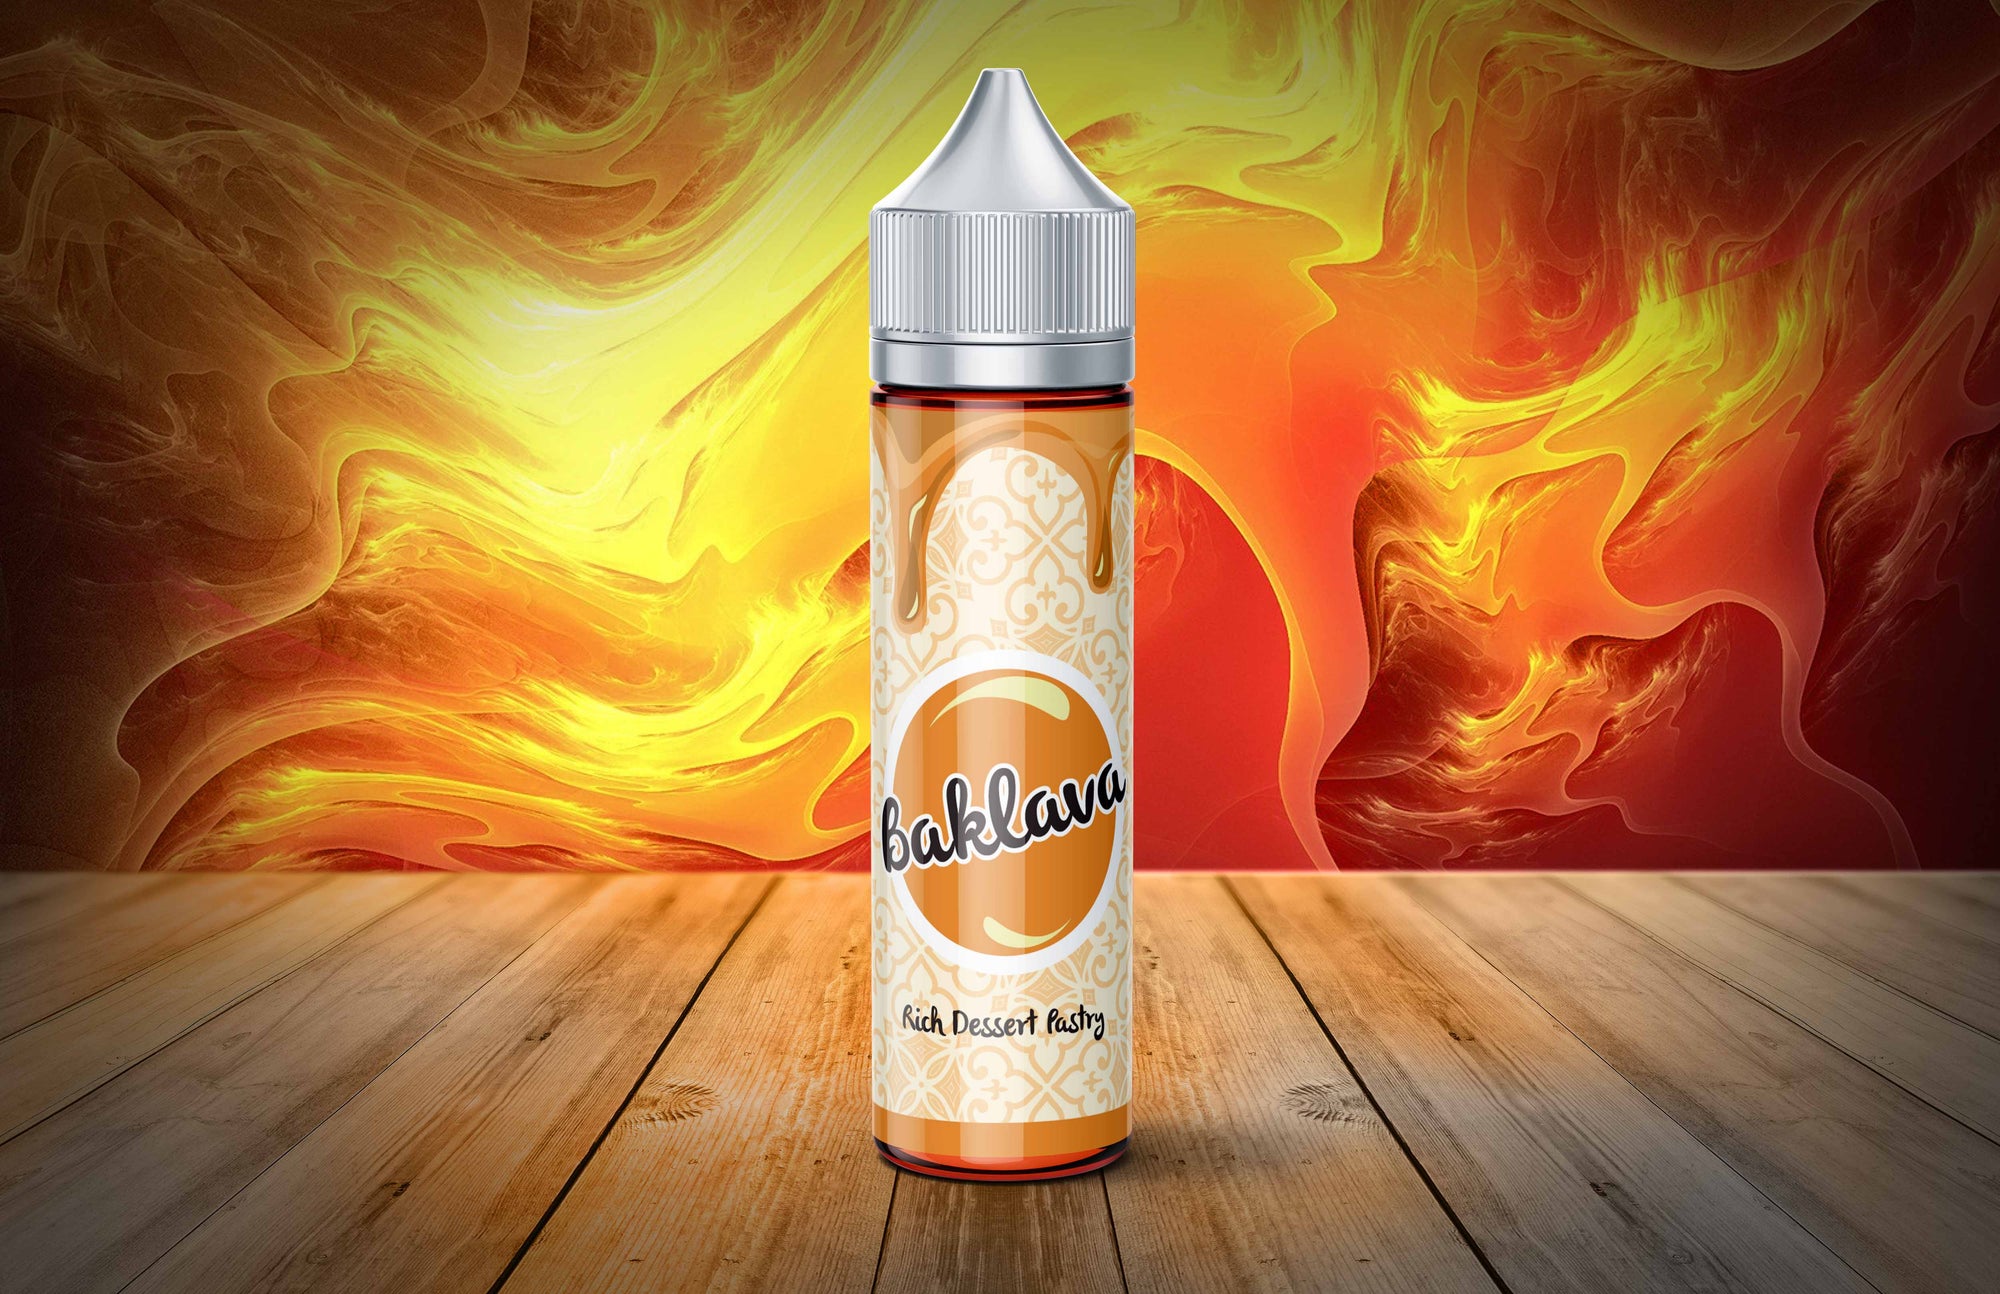 Buy Baklava - Baklava Pastry Ejuice by Mister Devices - Wick And Wire Co Melbourne Vape Shop, Victoria Australia